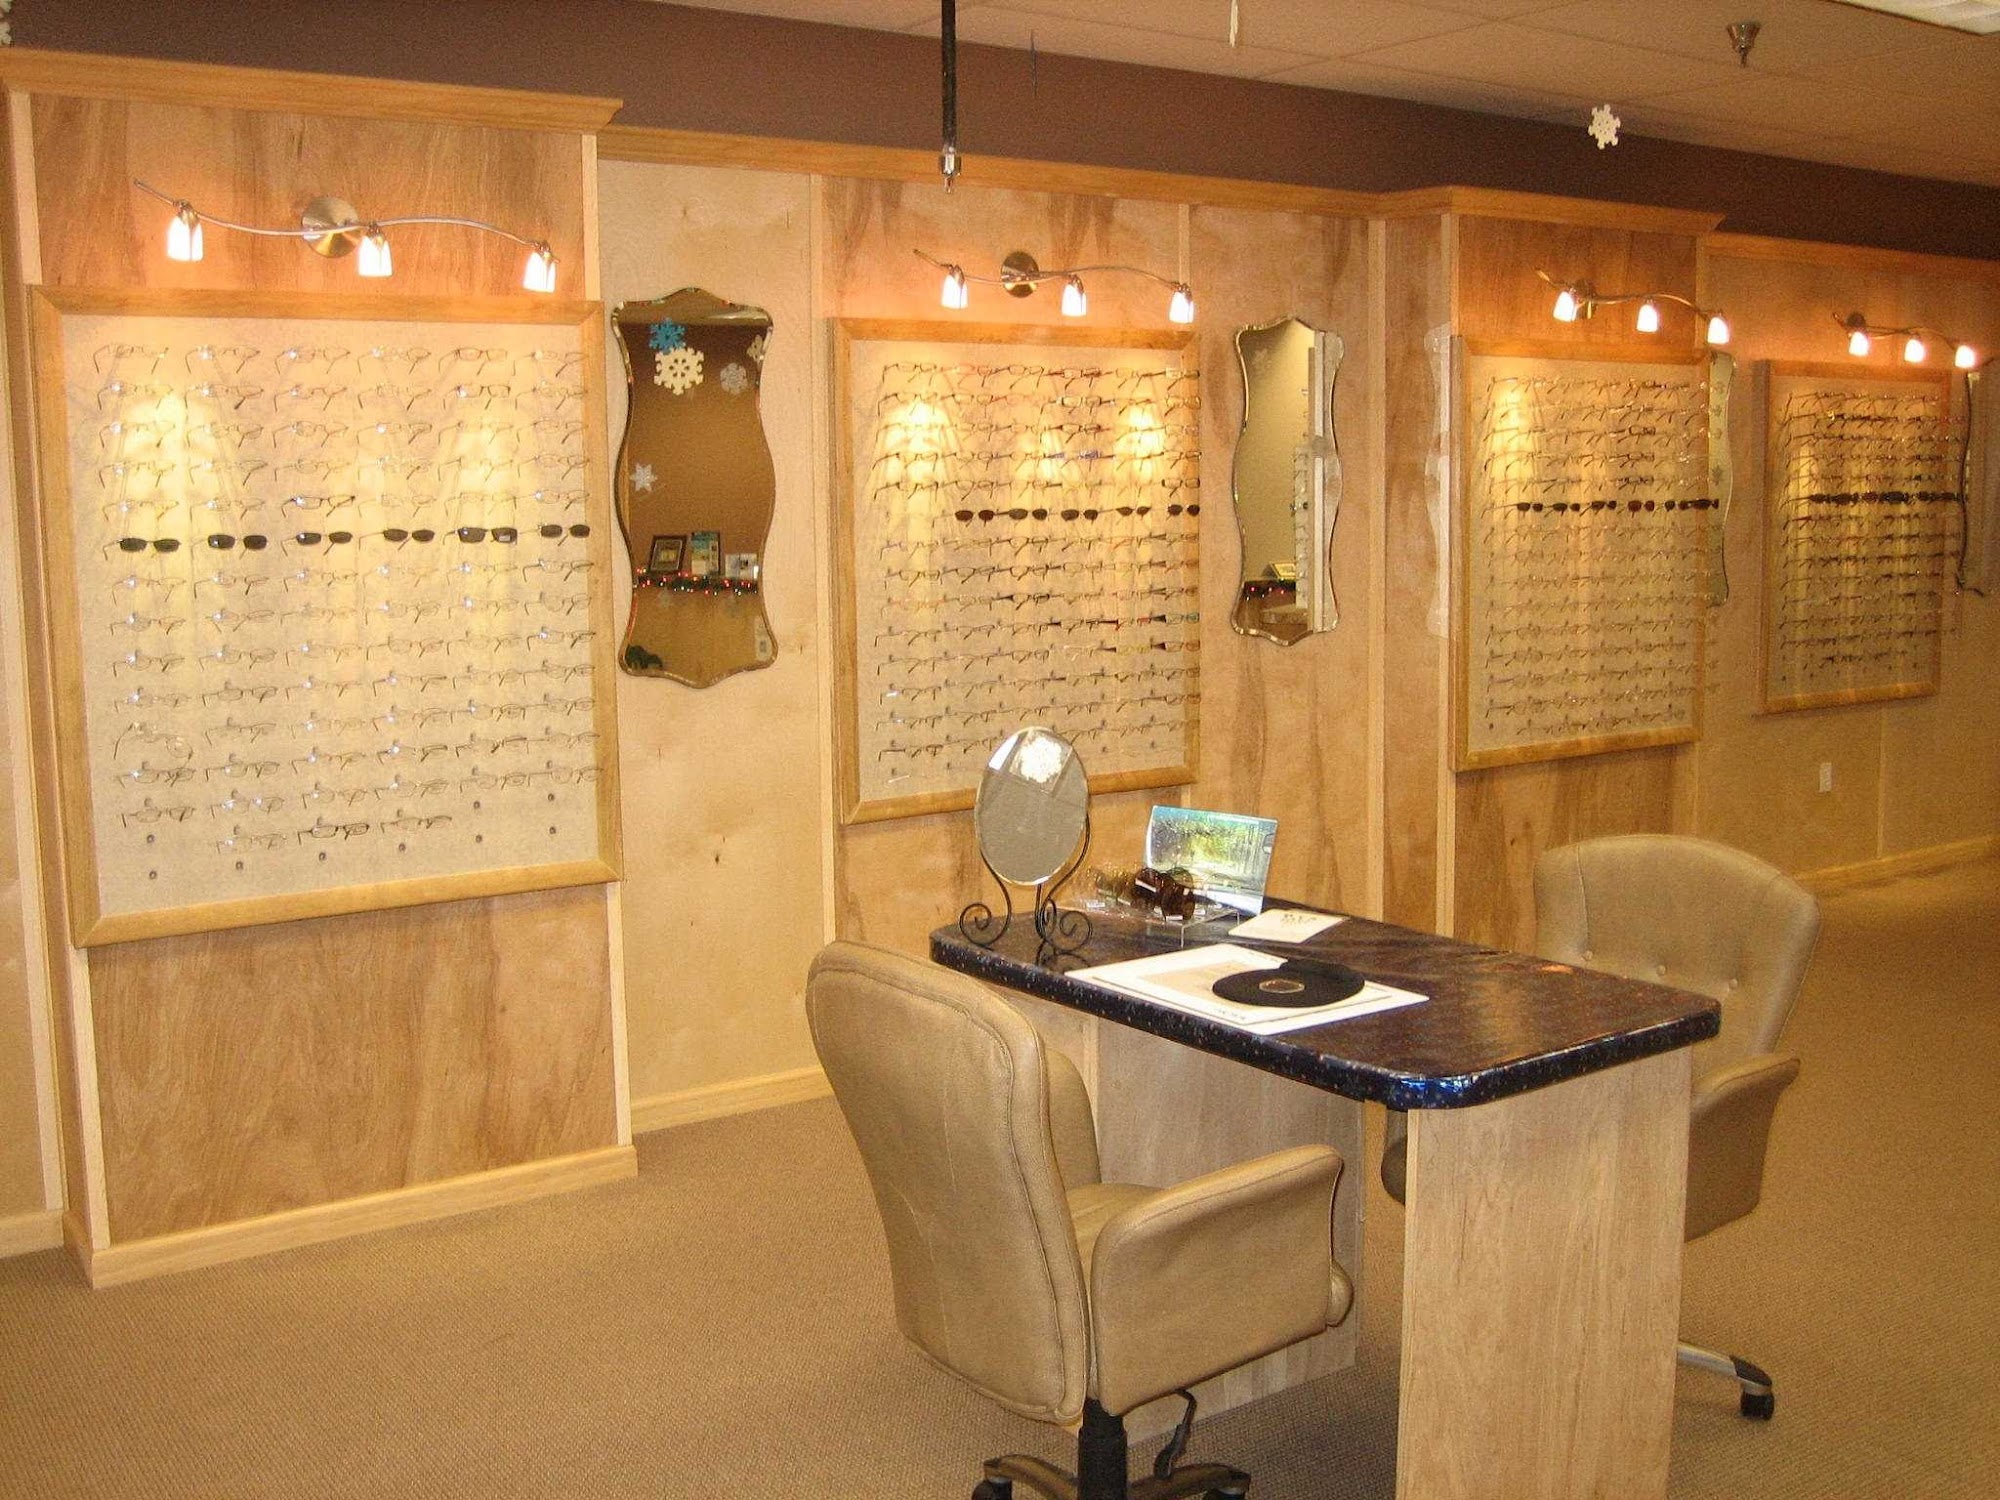 InSight Vision Care